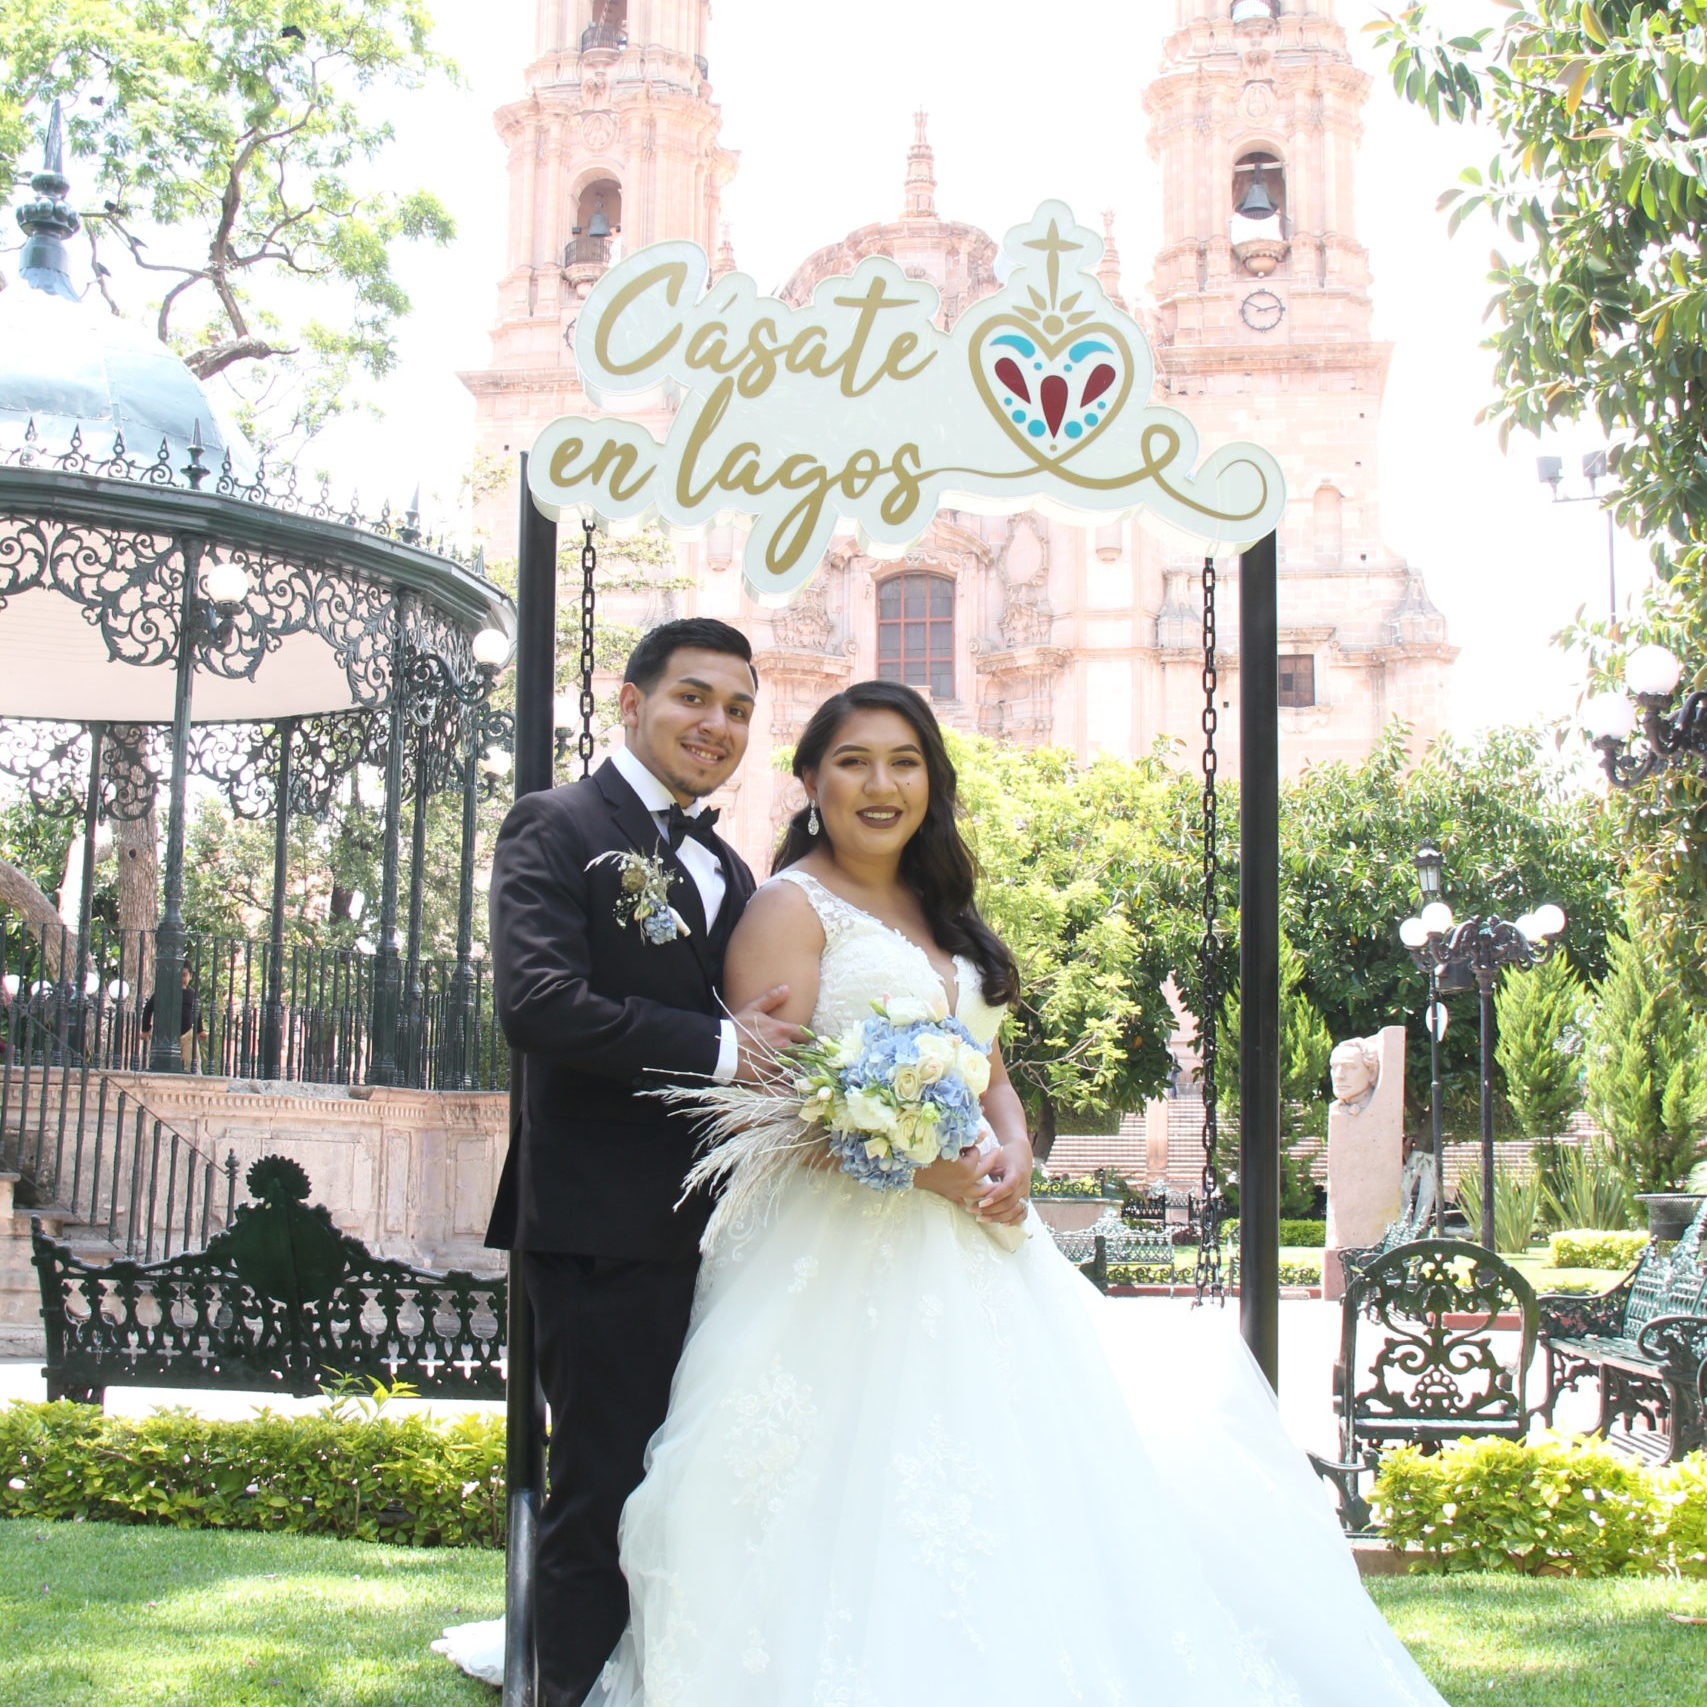 "SmartLoving helped us both to better understand the blessing that it is to get married through the Catholic Church. We learned so much more about ourselves, Christ, and how to better communicate with each other."